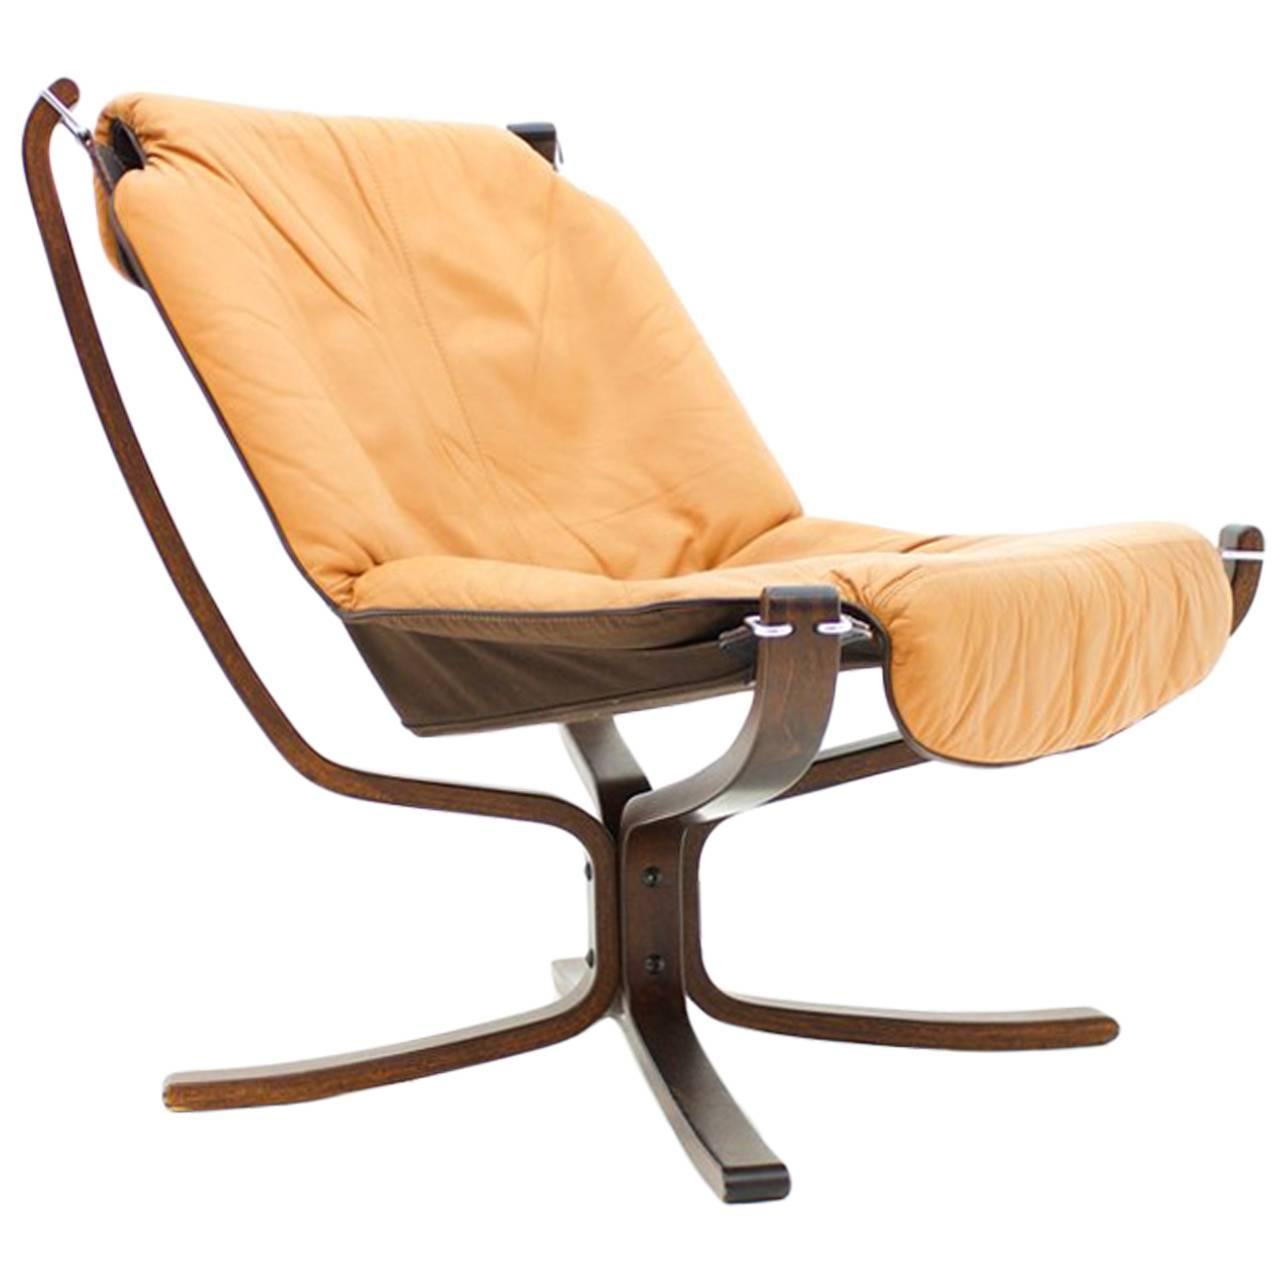 Falcon Lounge Chair by Sigurd Resell, Norway, 1971